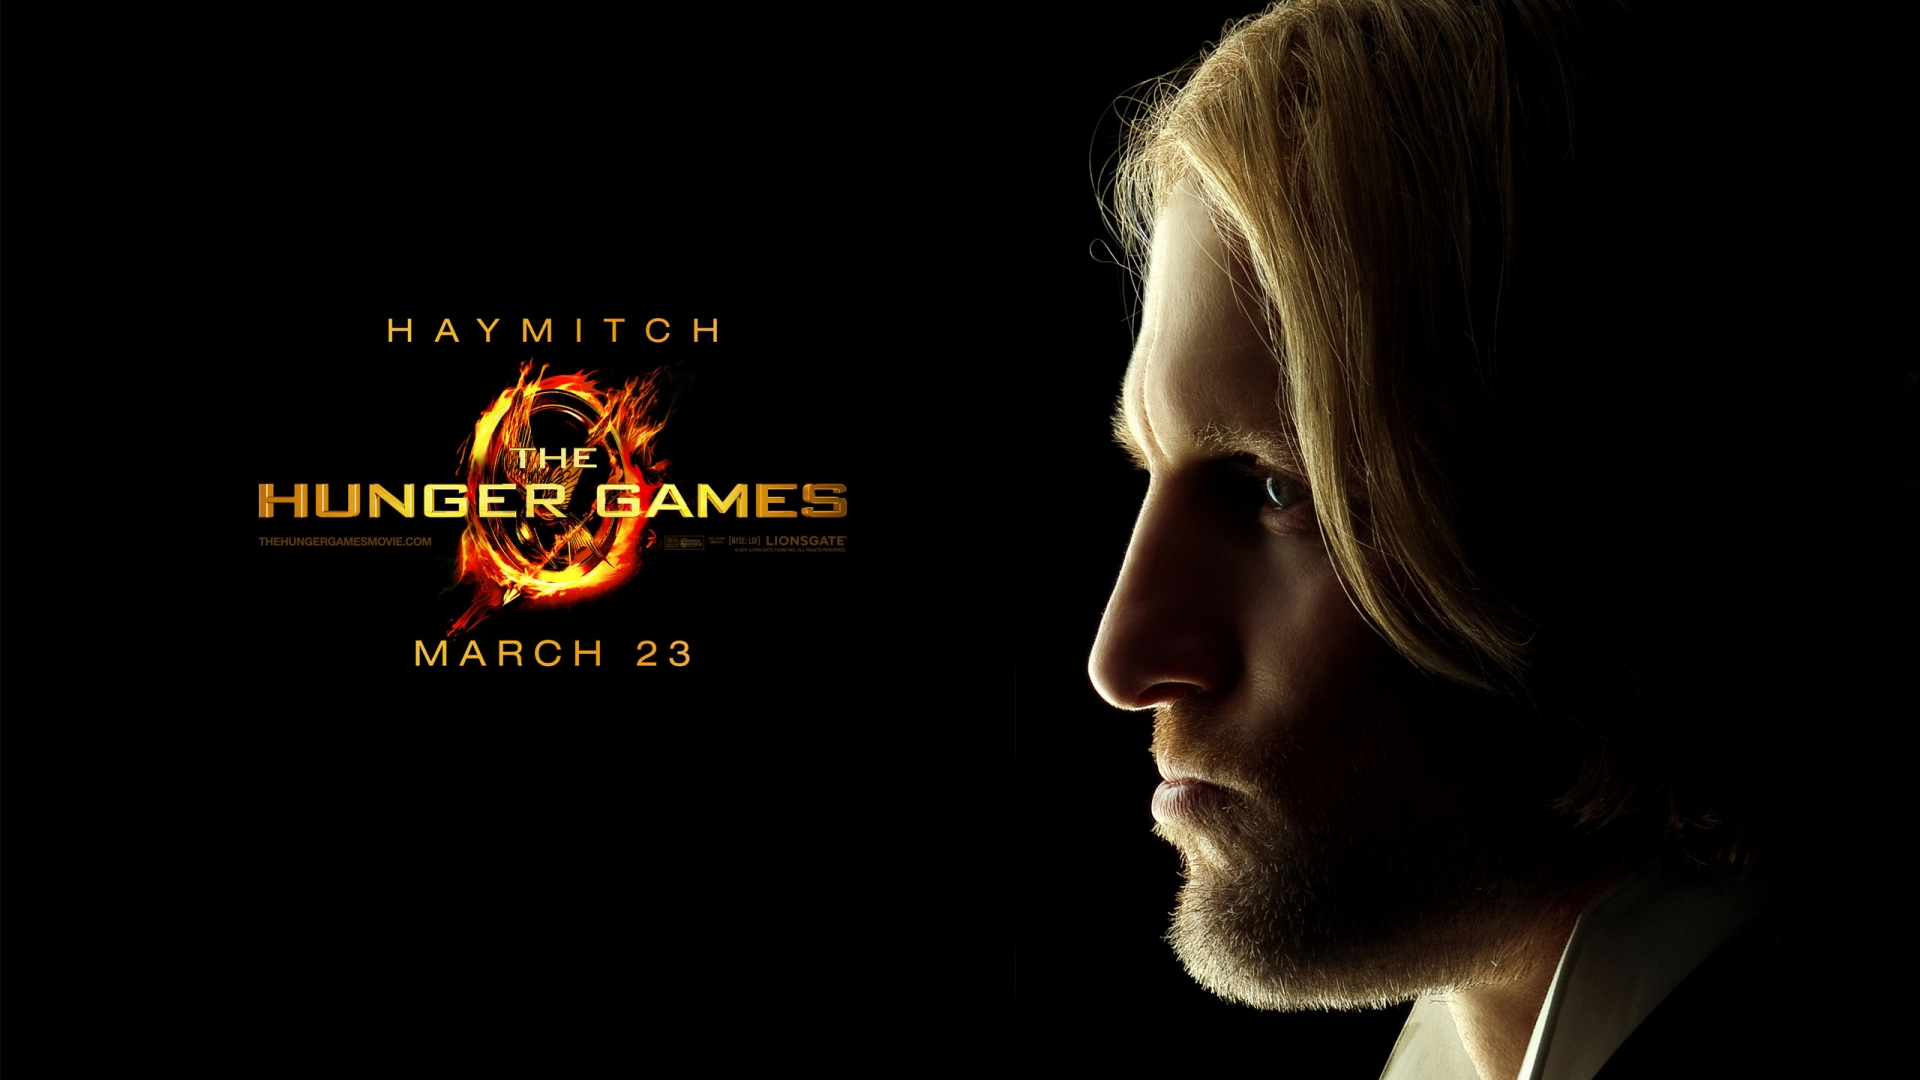 The Hunger Games Haymitch for 1920 x 1080 HDTV 1080p resolution